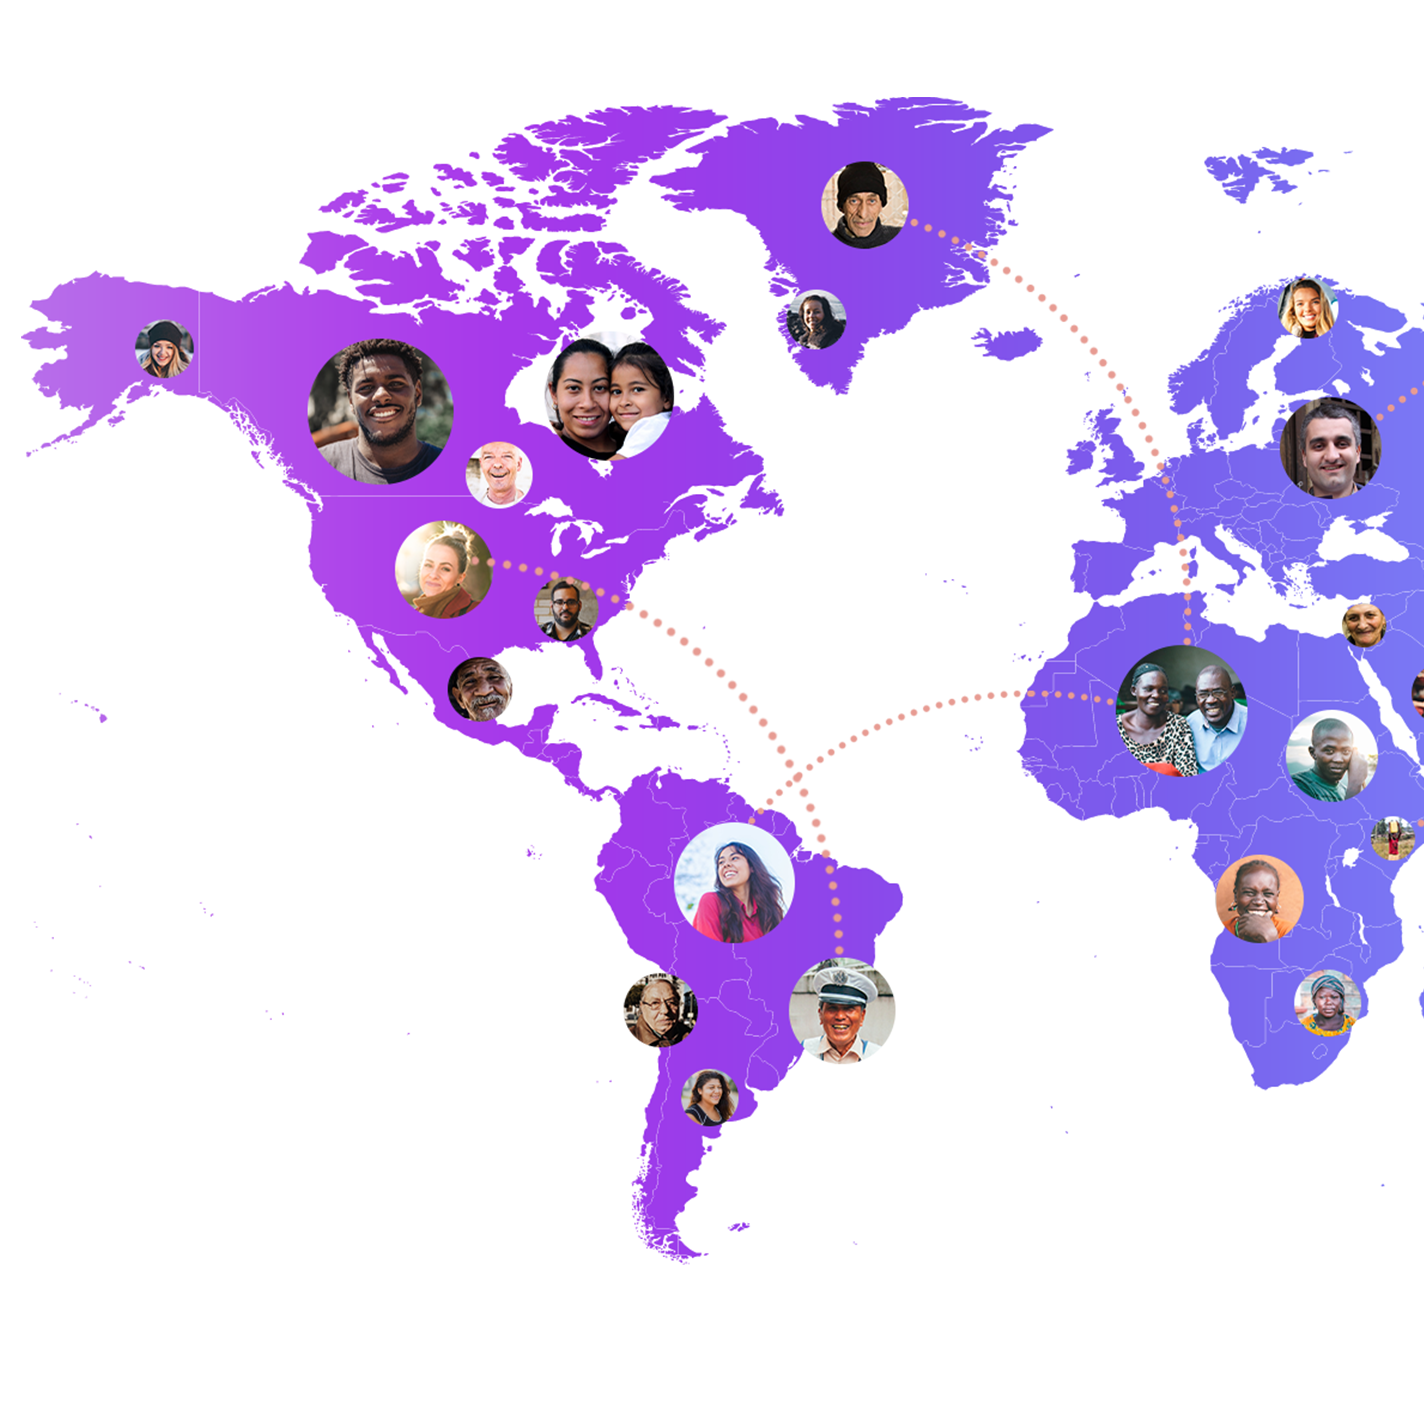 MessengerX app showing faces of people around the world and how everyone is connected